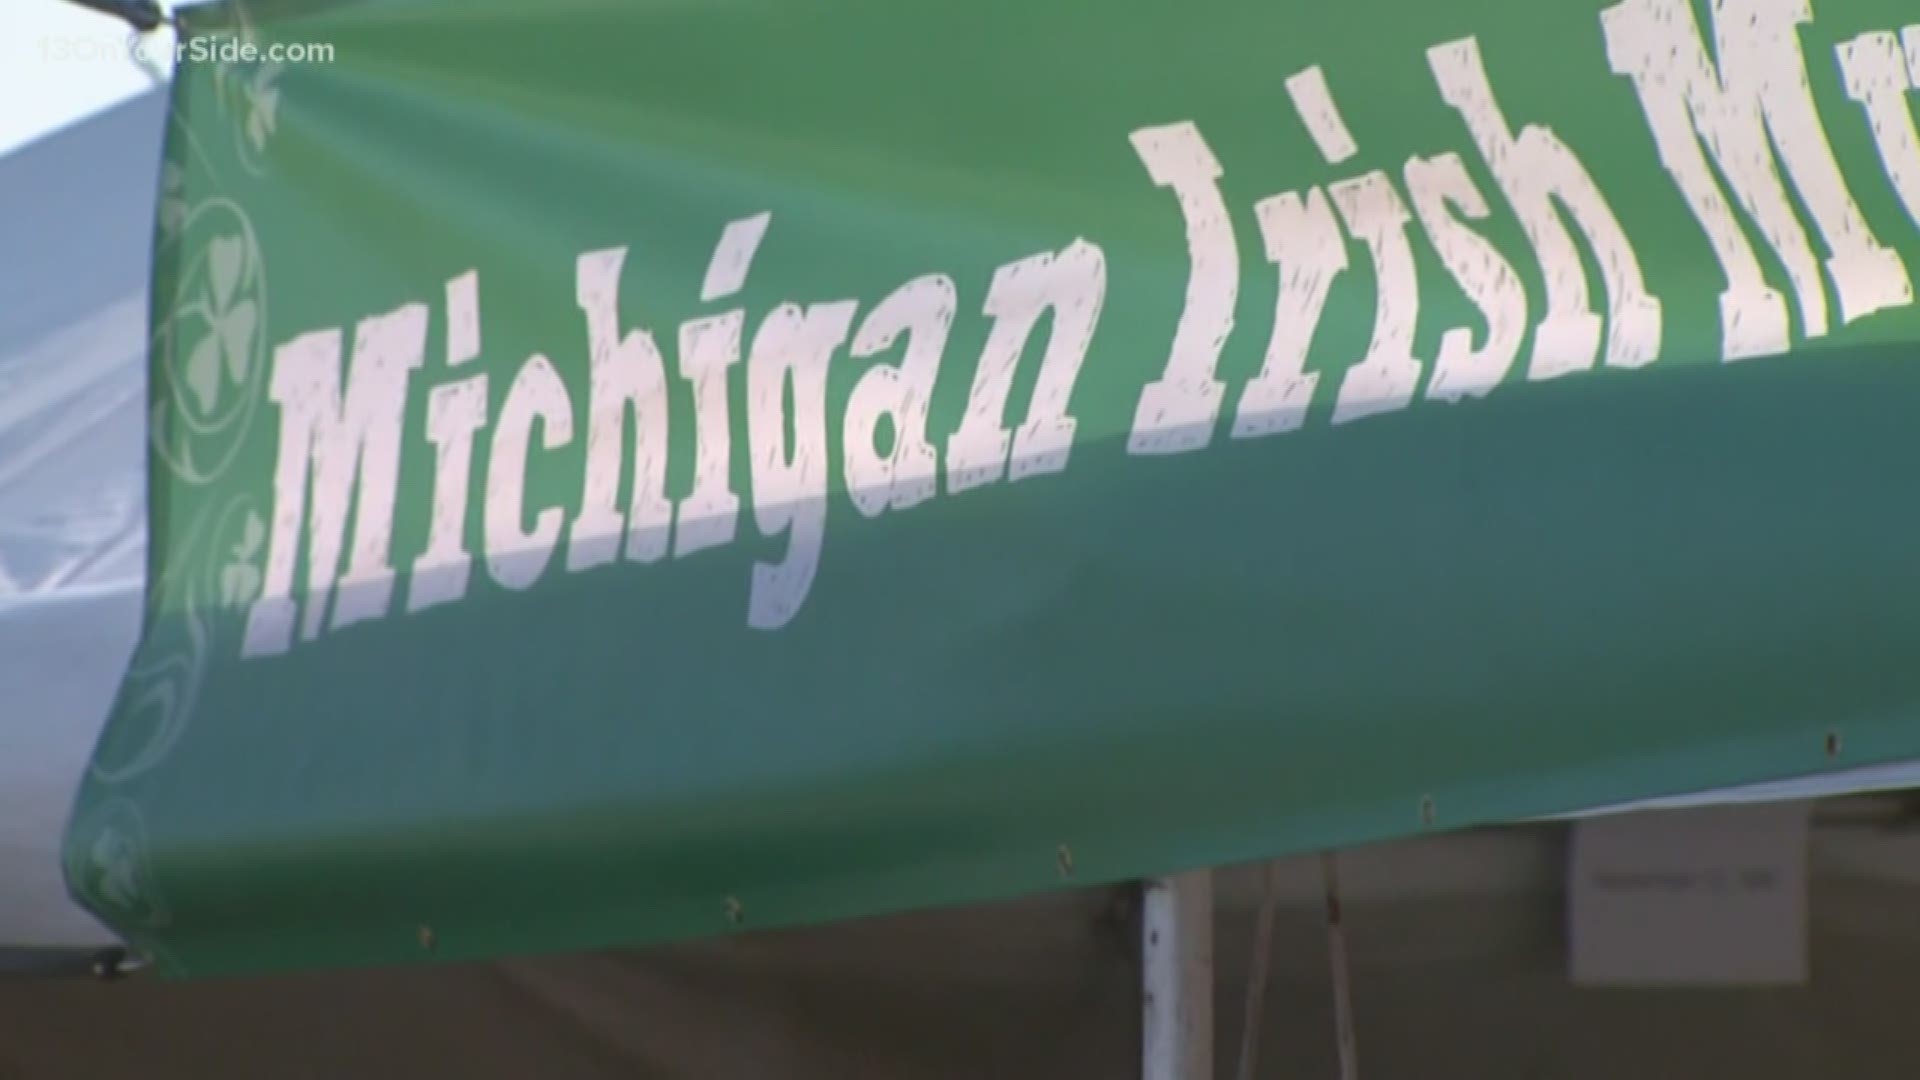 The Michigan Irish Music Festival is nearly here and will be held at Heritage Landing in downtown Muskegon.